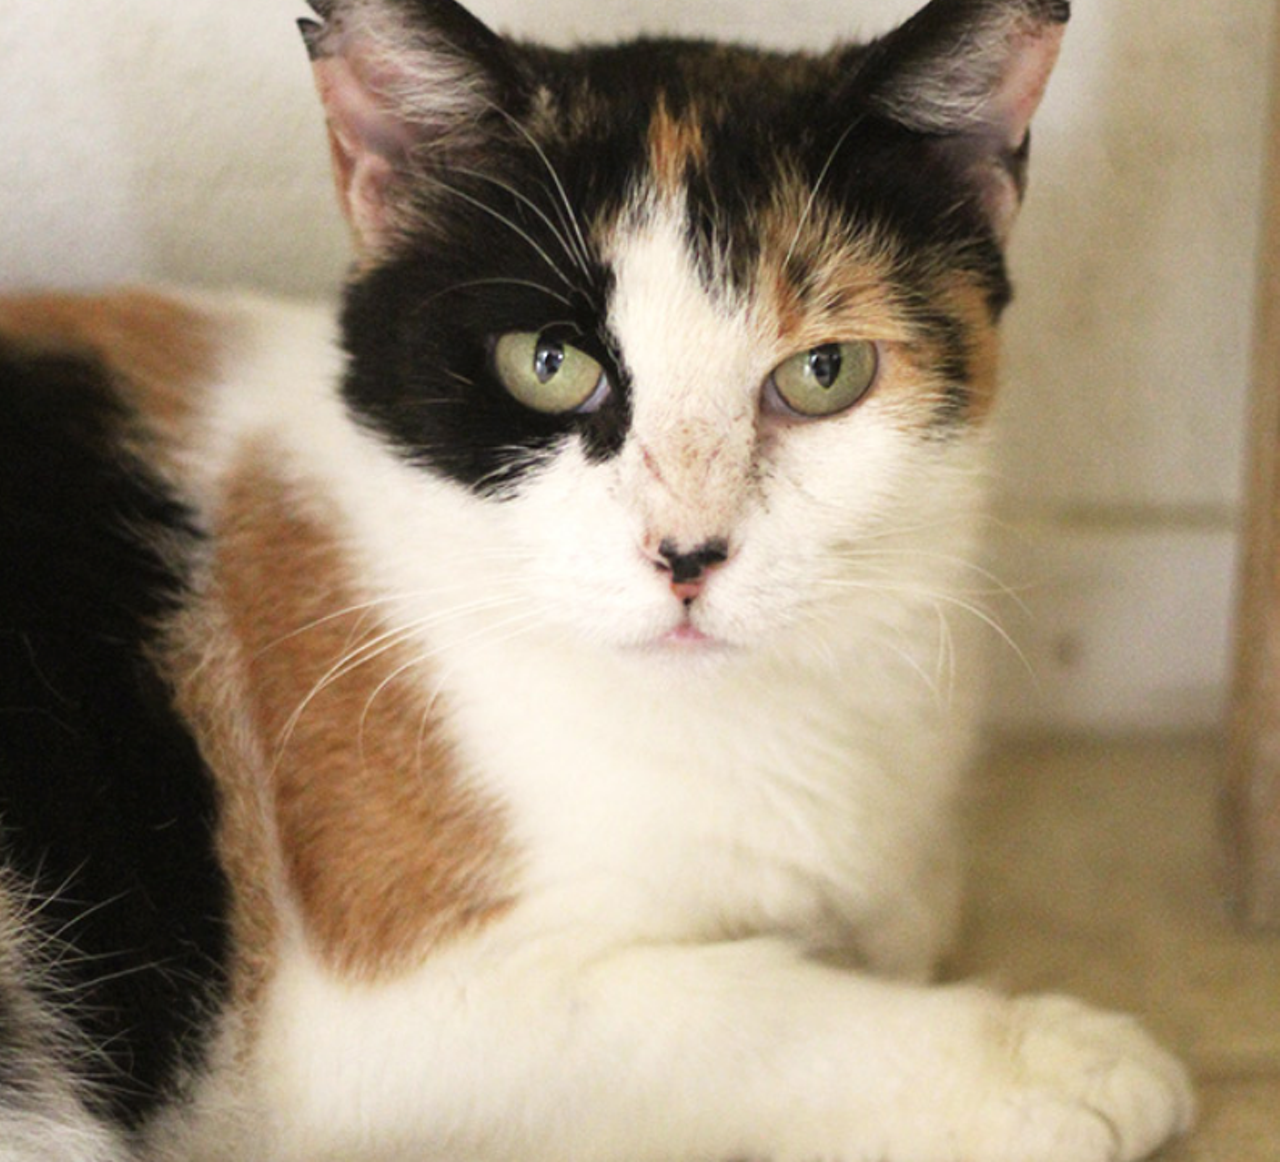 Ellawese
"I'm a calm, pretty calico. I really love lounging around and sleeping. If you ever visit me in the Cattery, you'll catch me in the middle of one of my many siestas. I don't mind being woken up as long as you pet me when you do. Take me home and we can siesta together!"